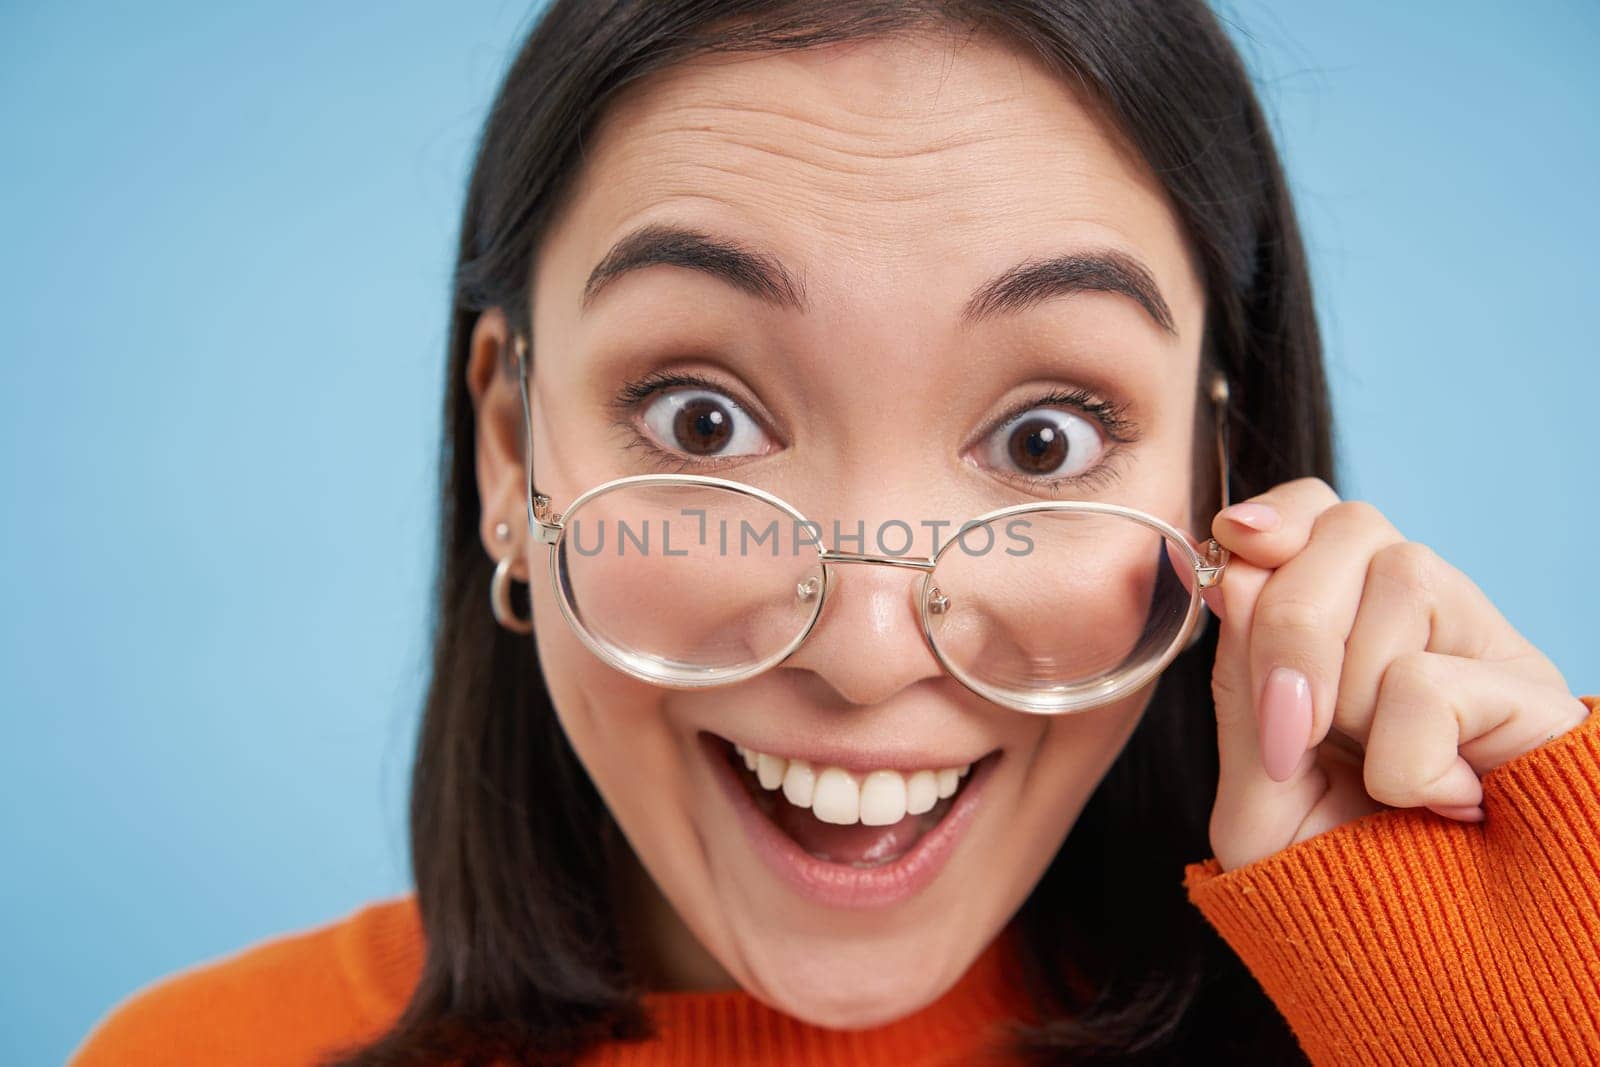 Close up portrait of amazed girl, looks closer at camera in glasses, standing against blue background. Copy space